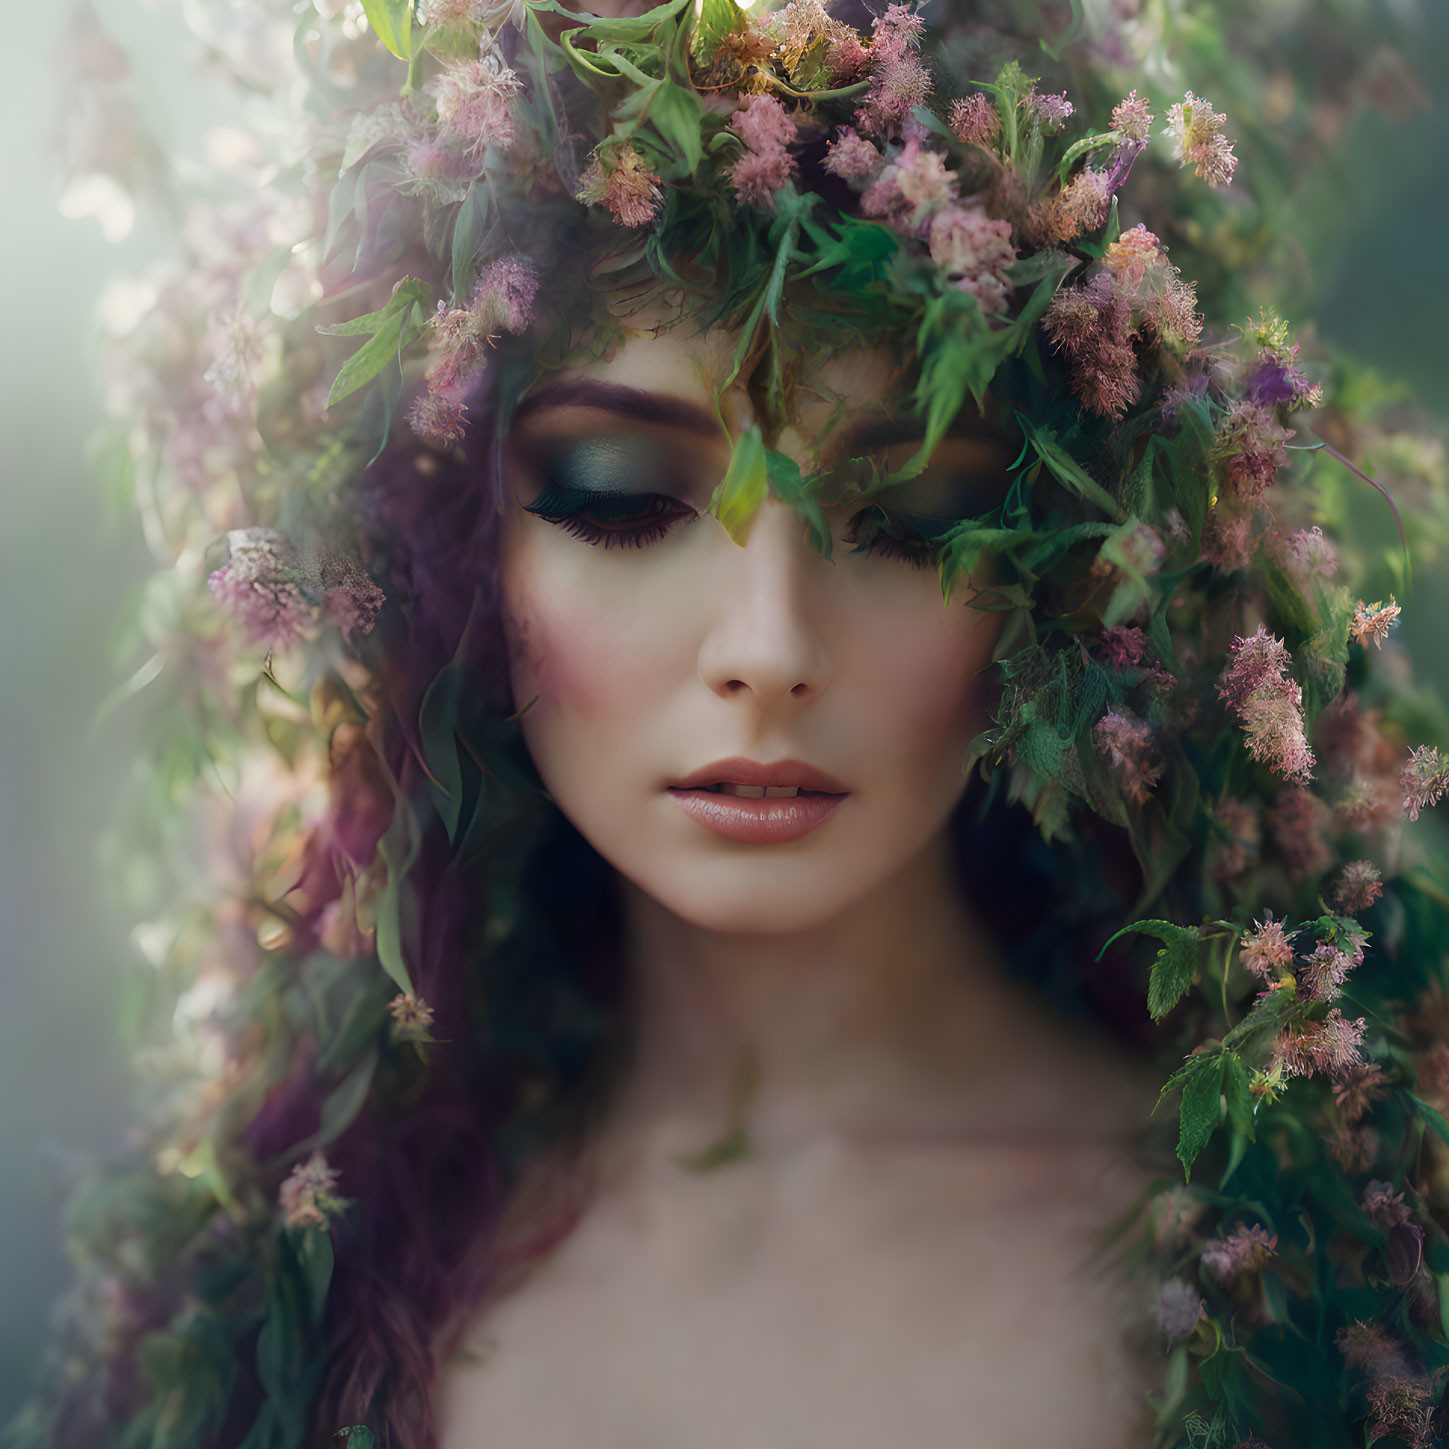 Woman with serene expression wearing floral headdress surrounded by delicate blooms and greenery.